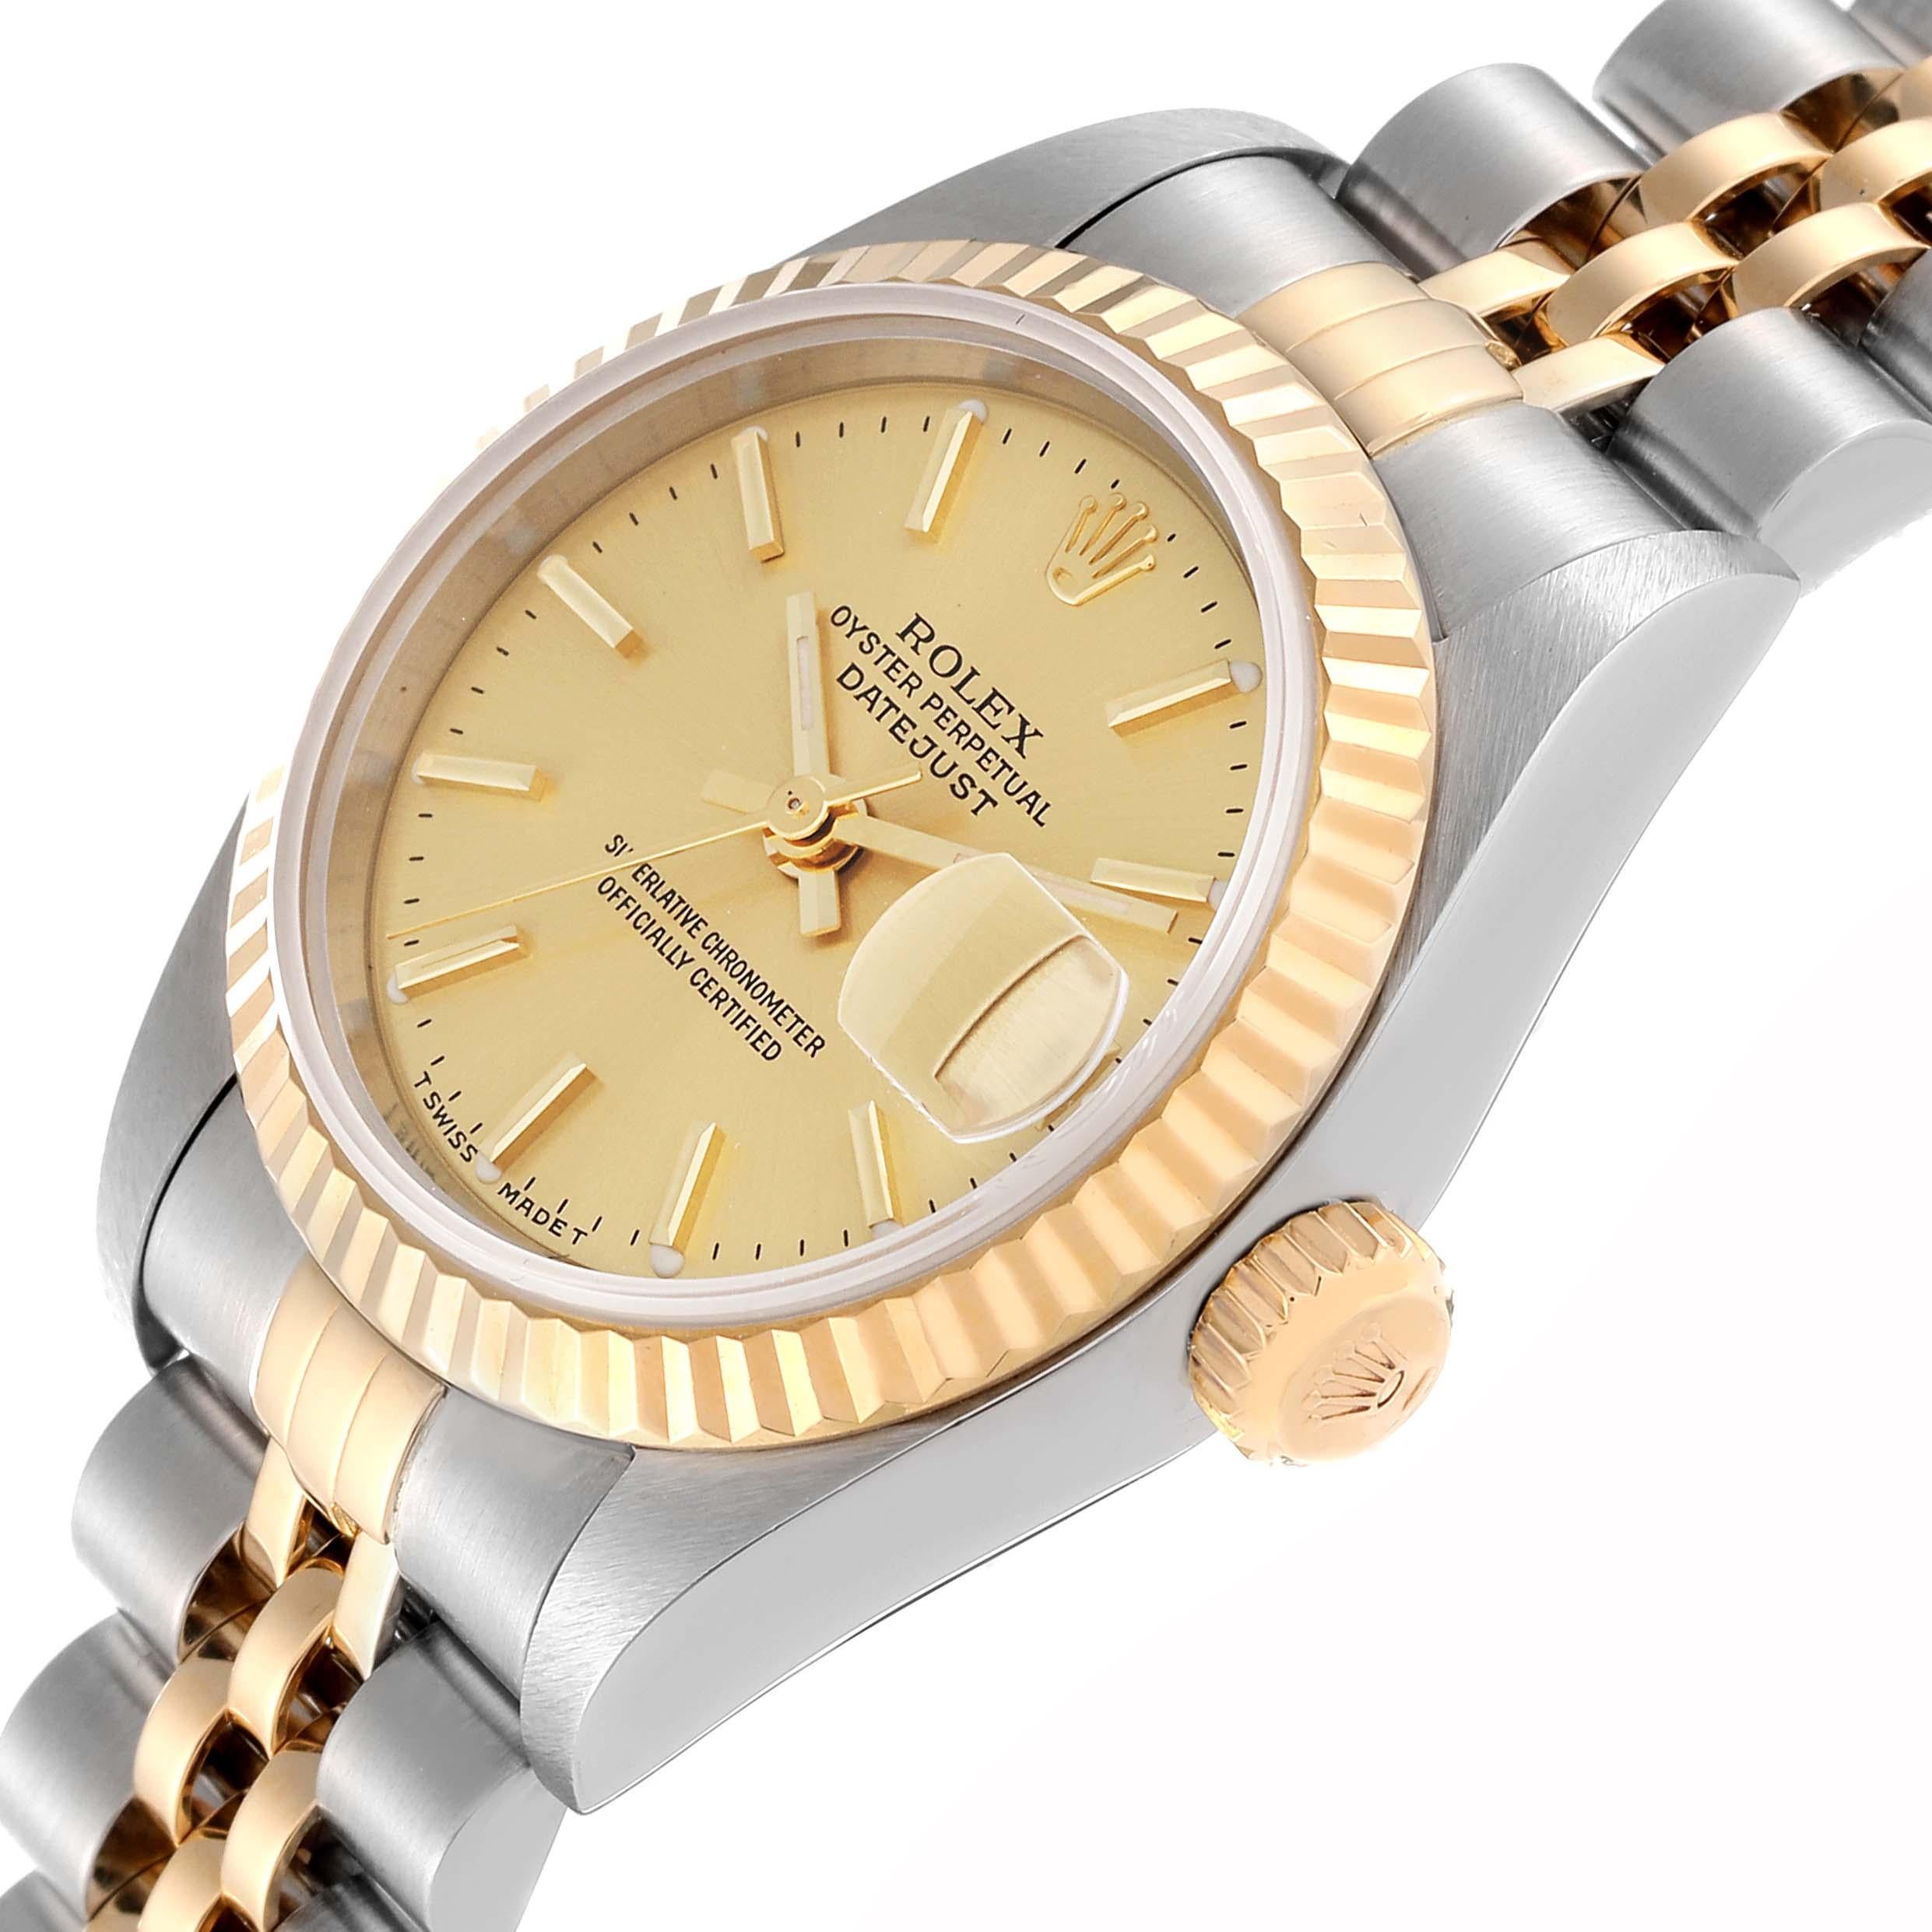 Rolex Datejust Steel Yellow Gold Champagne Dial Ladies Watch 79173 For Sale 3